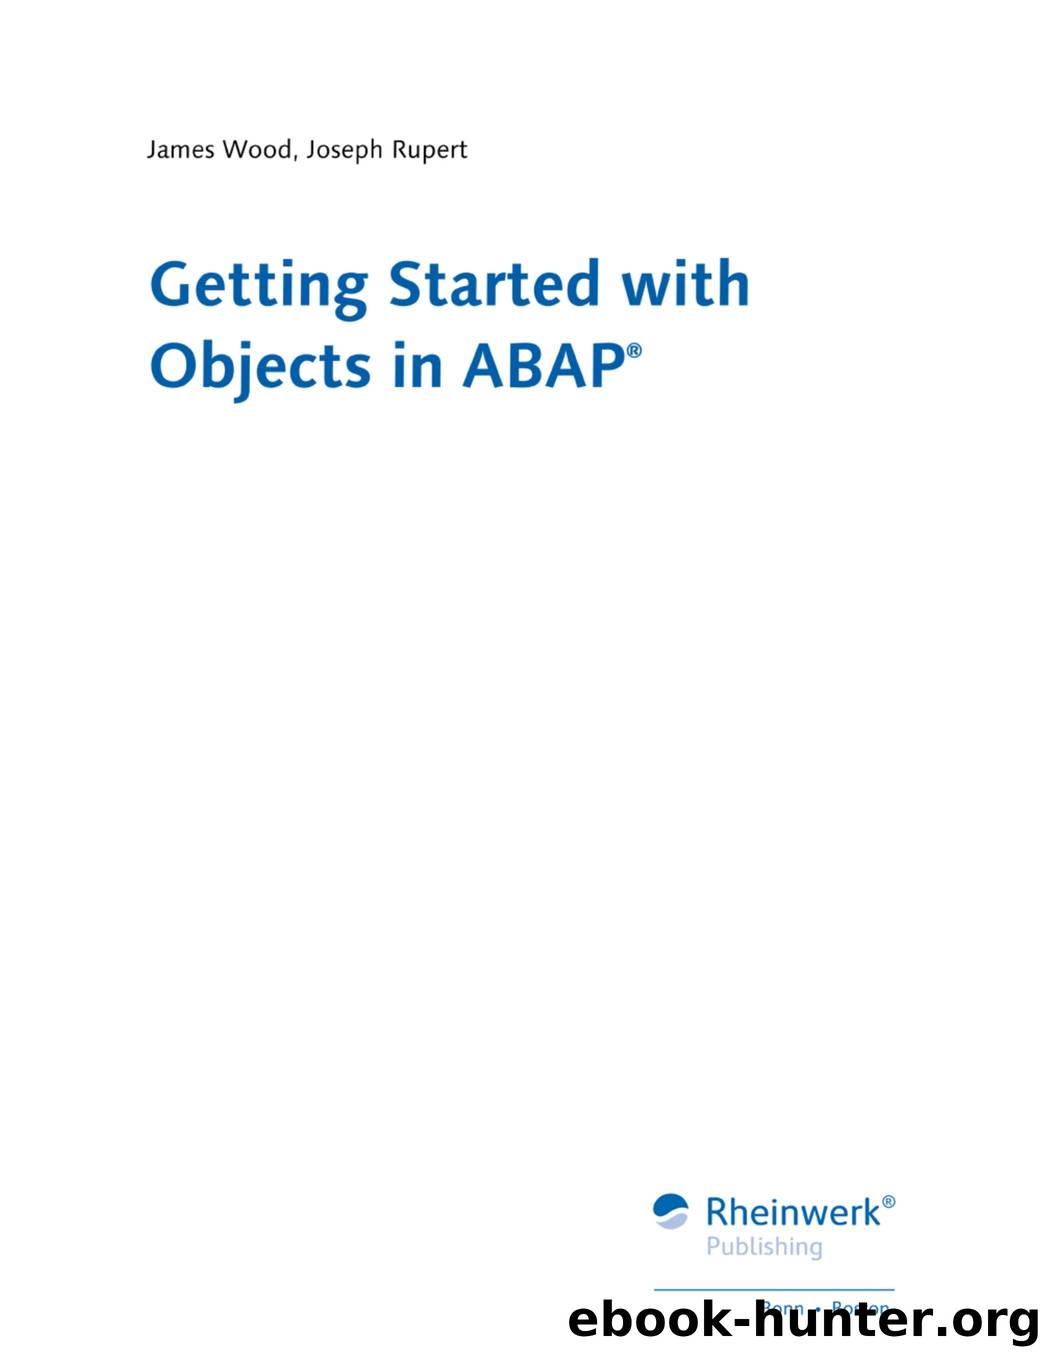 Getting Started with Objects in ABAP by Unknown